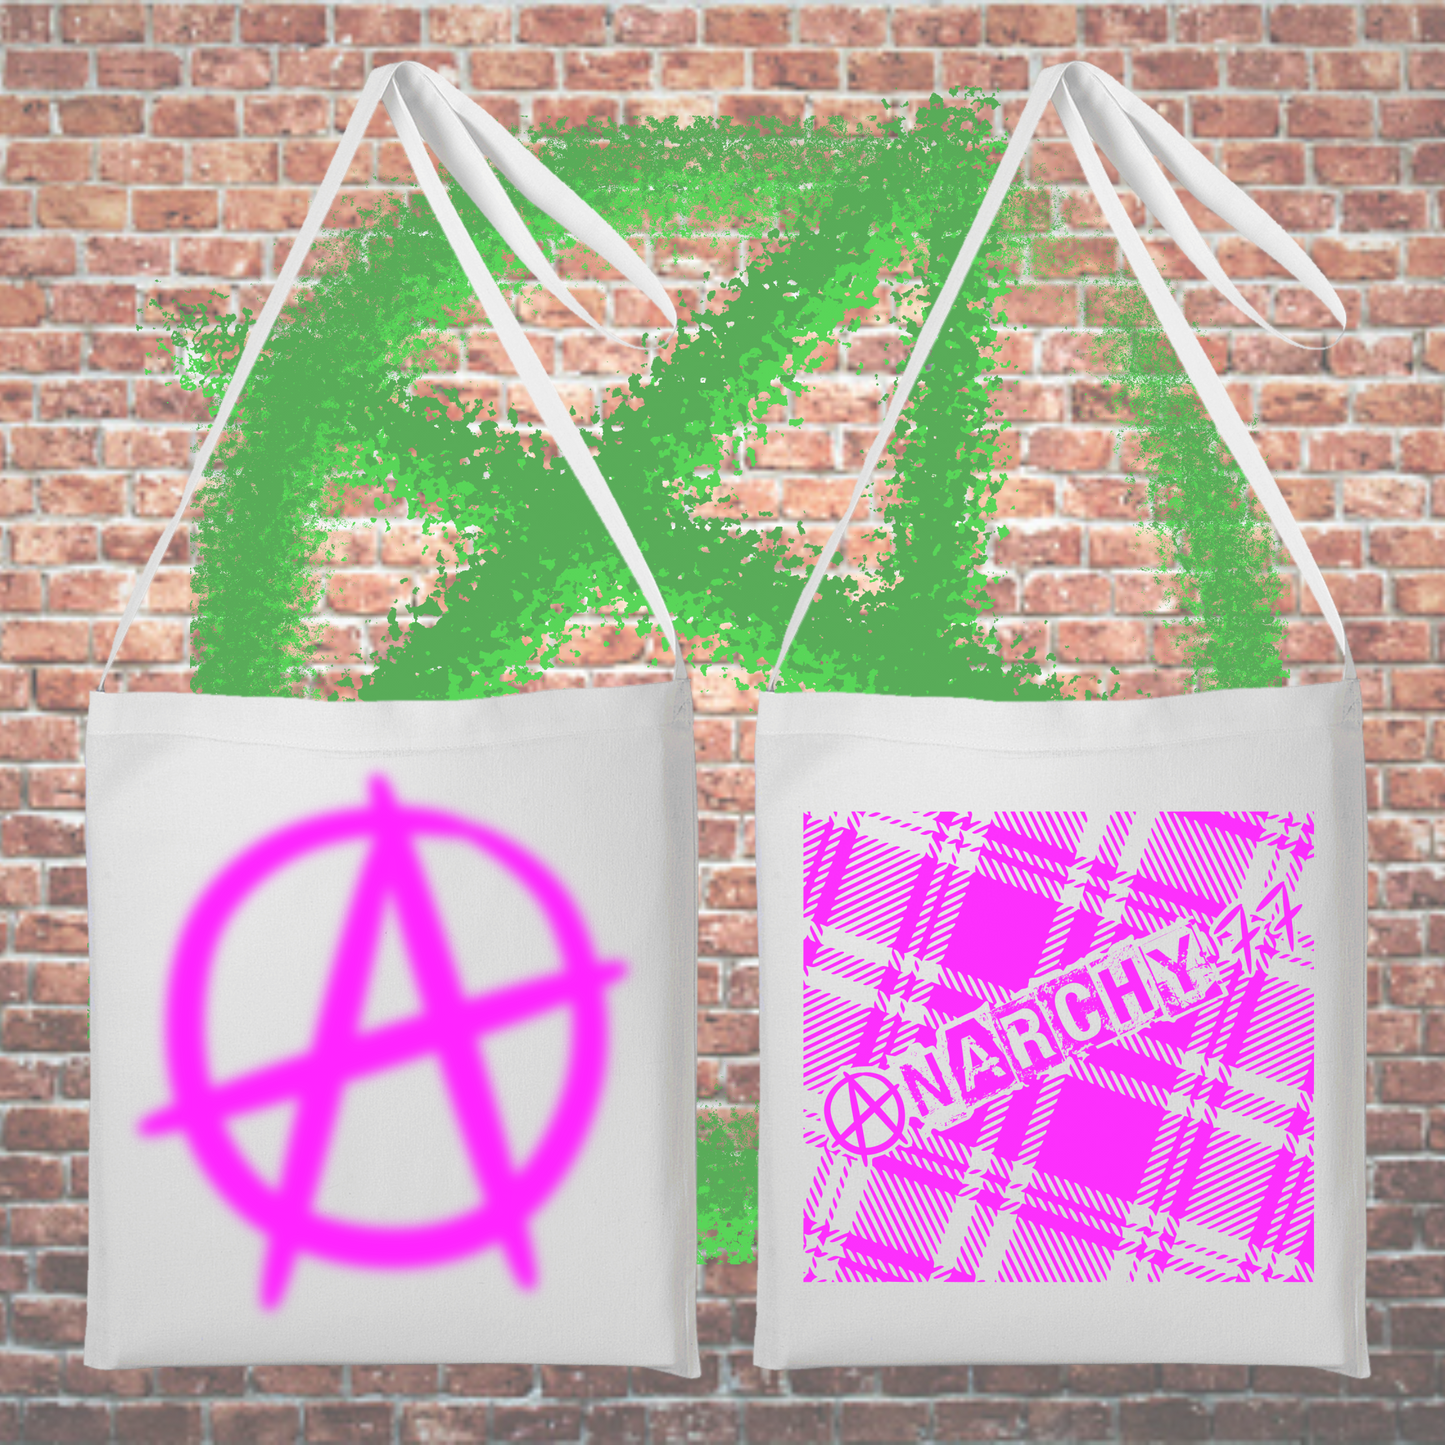 Anarchy 77 The Shoulder Tote Bag white and pink